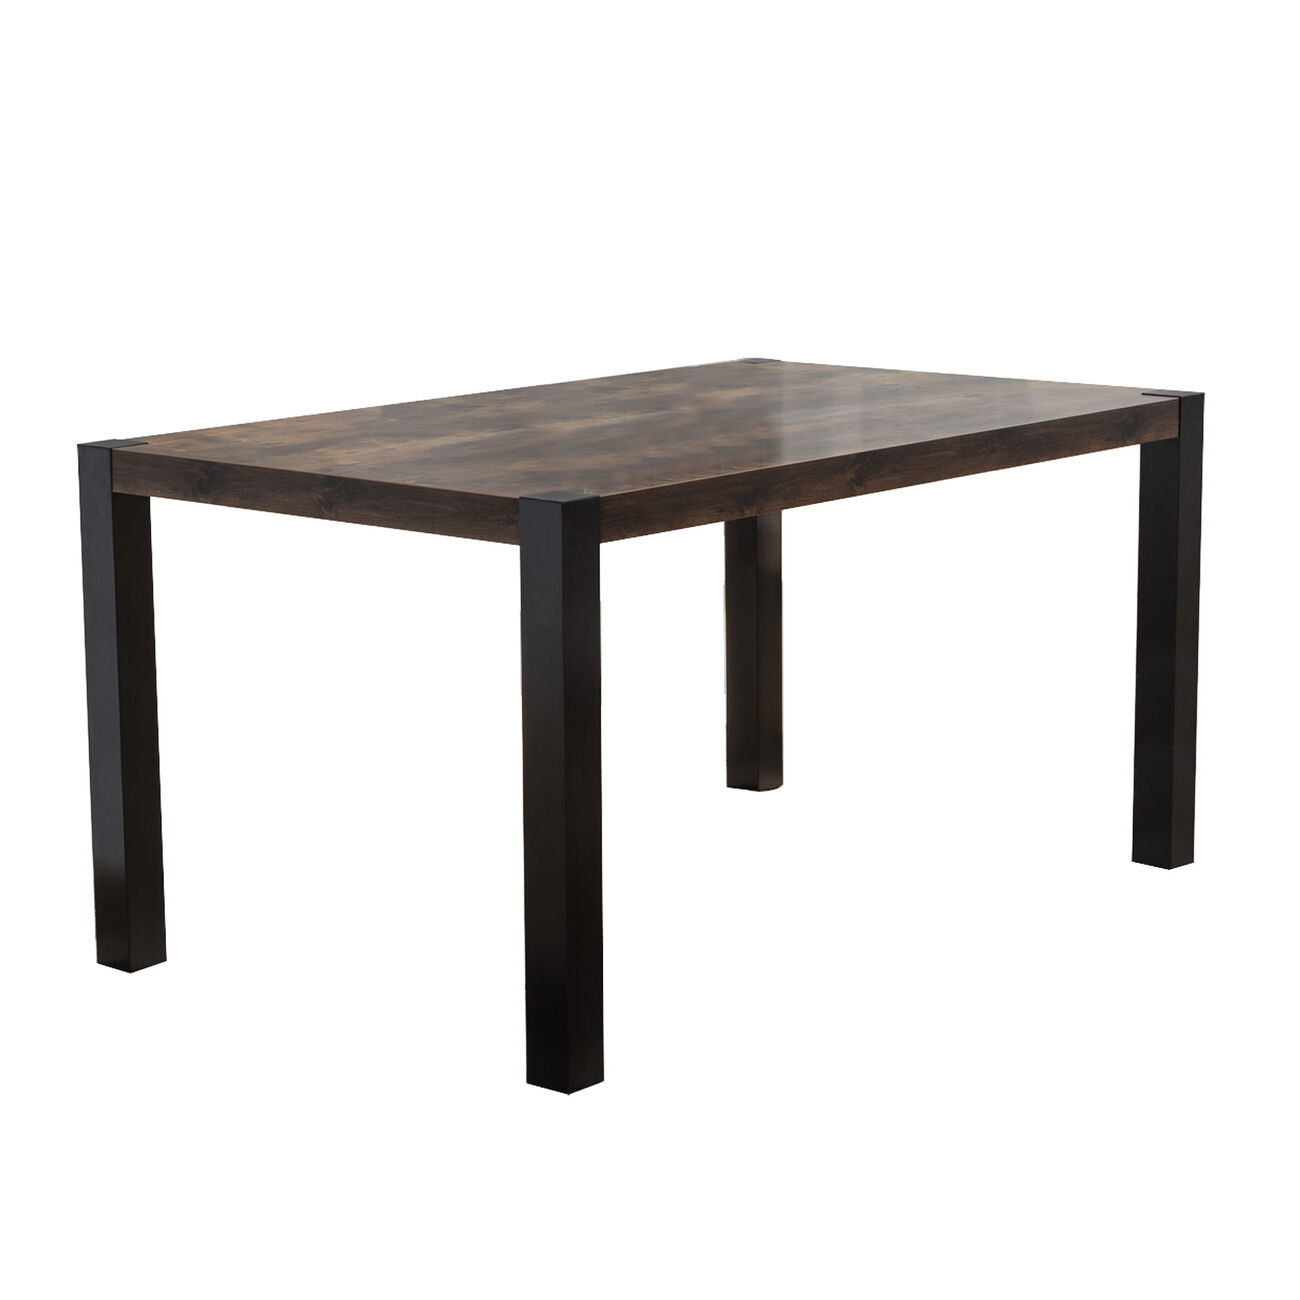 Wooden Dining Table with Straight Legs, Distressed Brown and Black